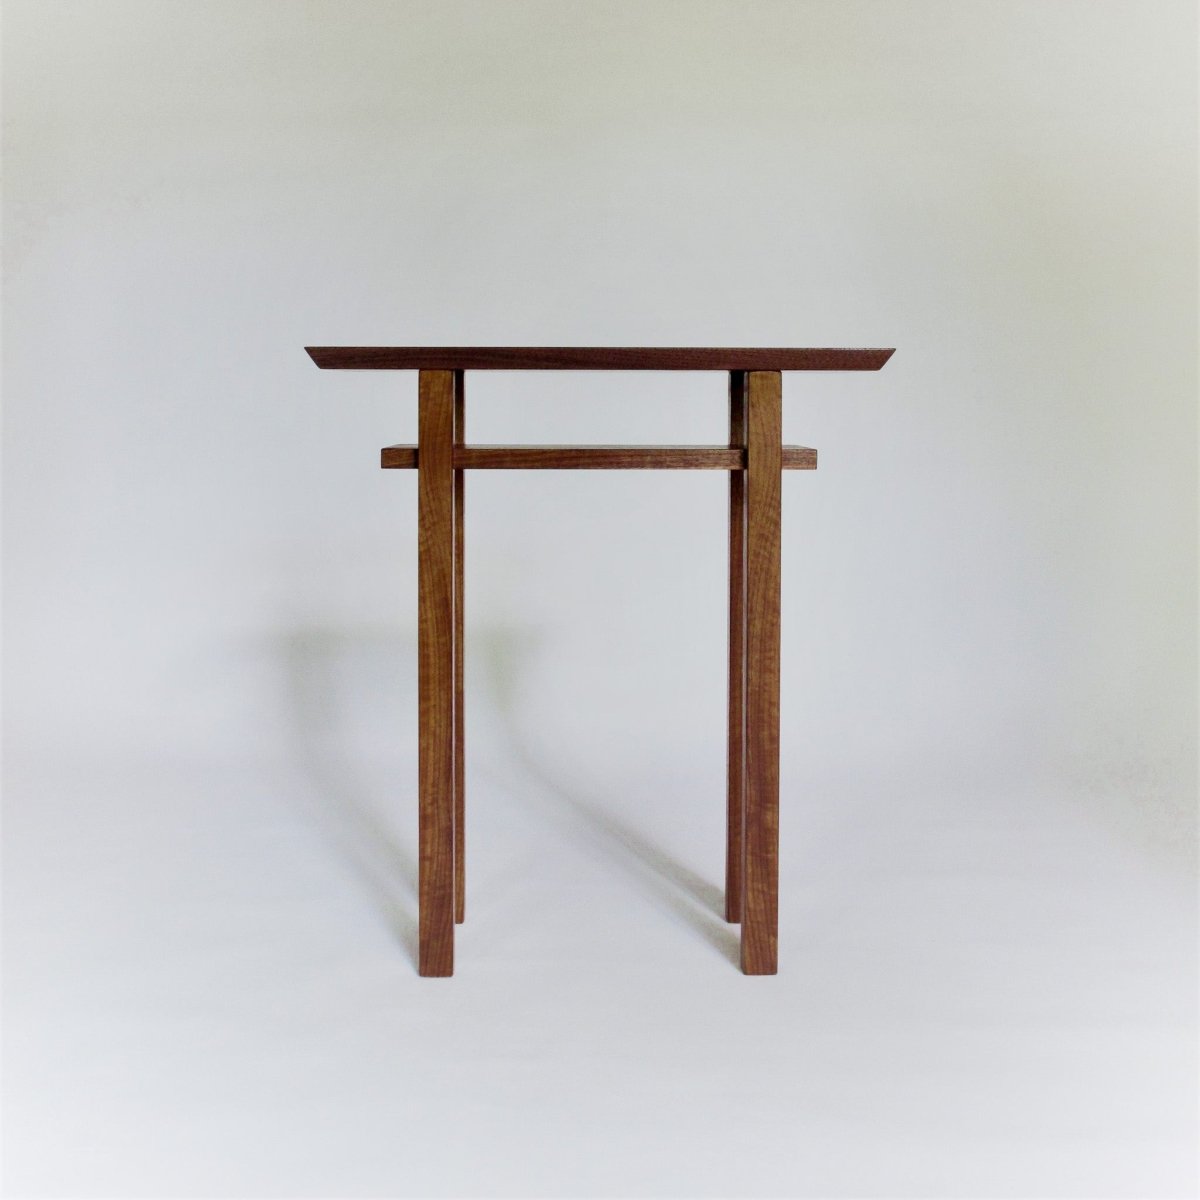 a small narrow wooden end table by Mokuzai Furniture.  This small end table has contemporary furniture lines and is handcrafted from only the most premium wood.